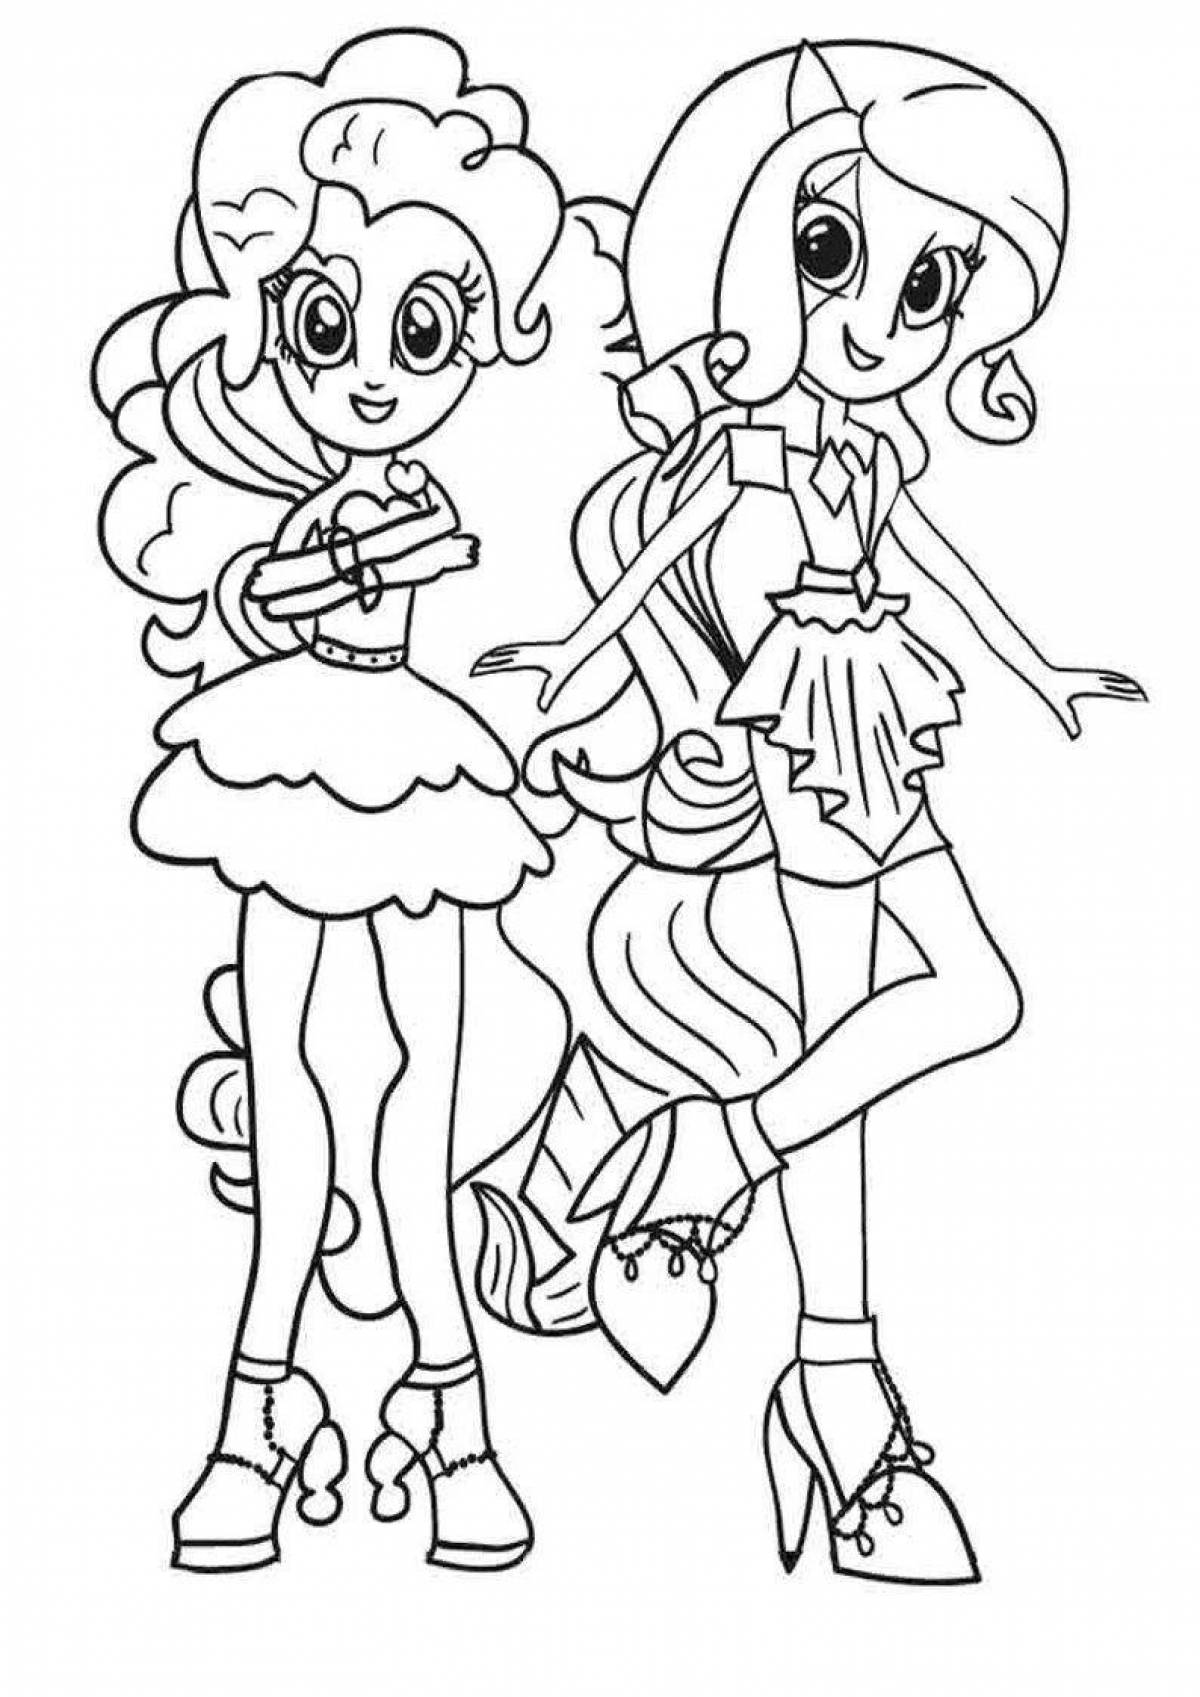 Violent pony doll coloring page